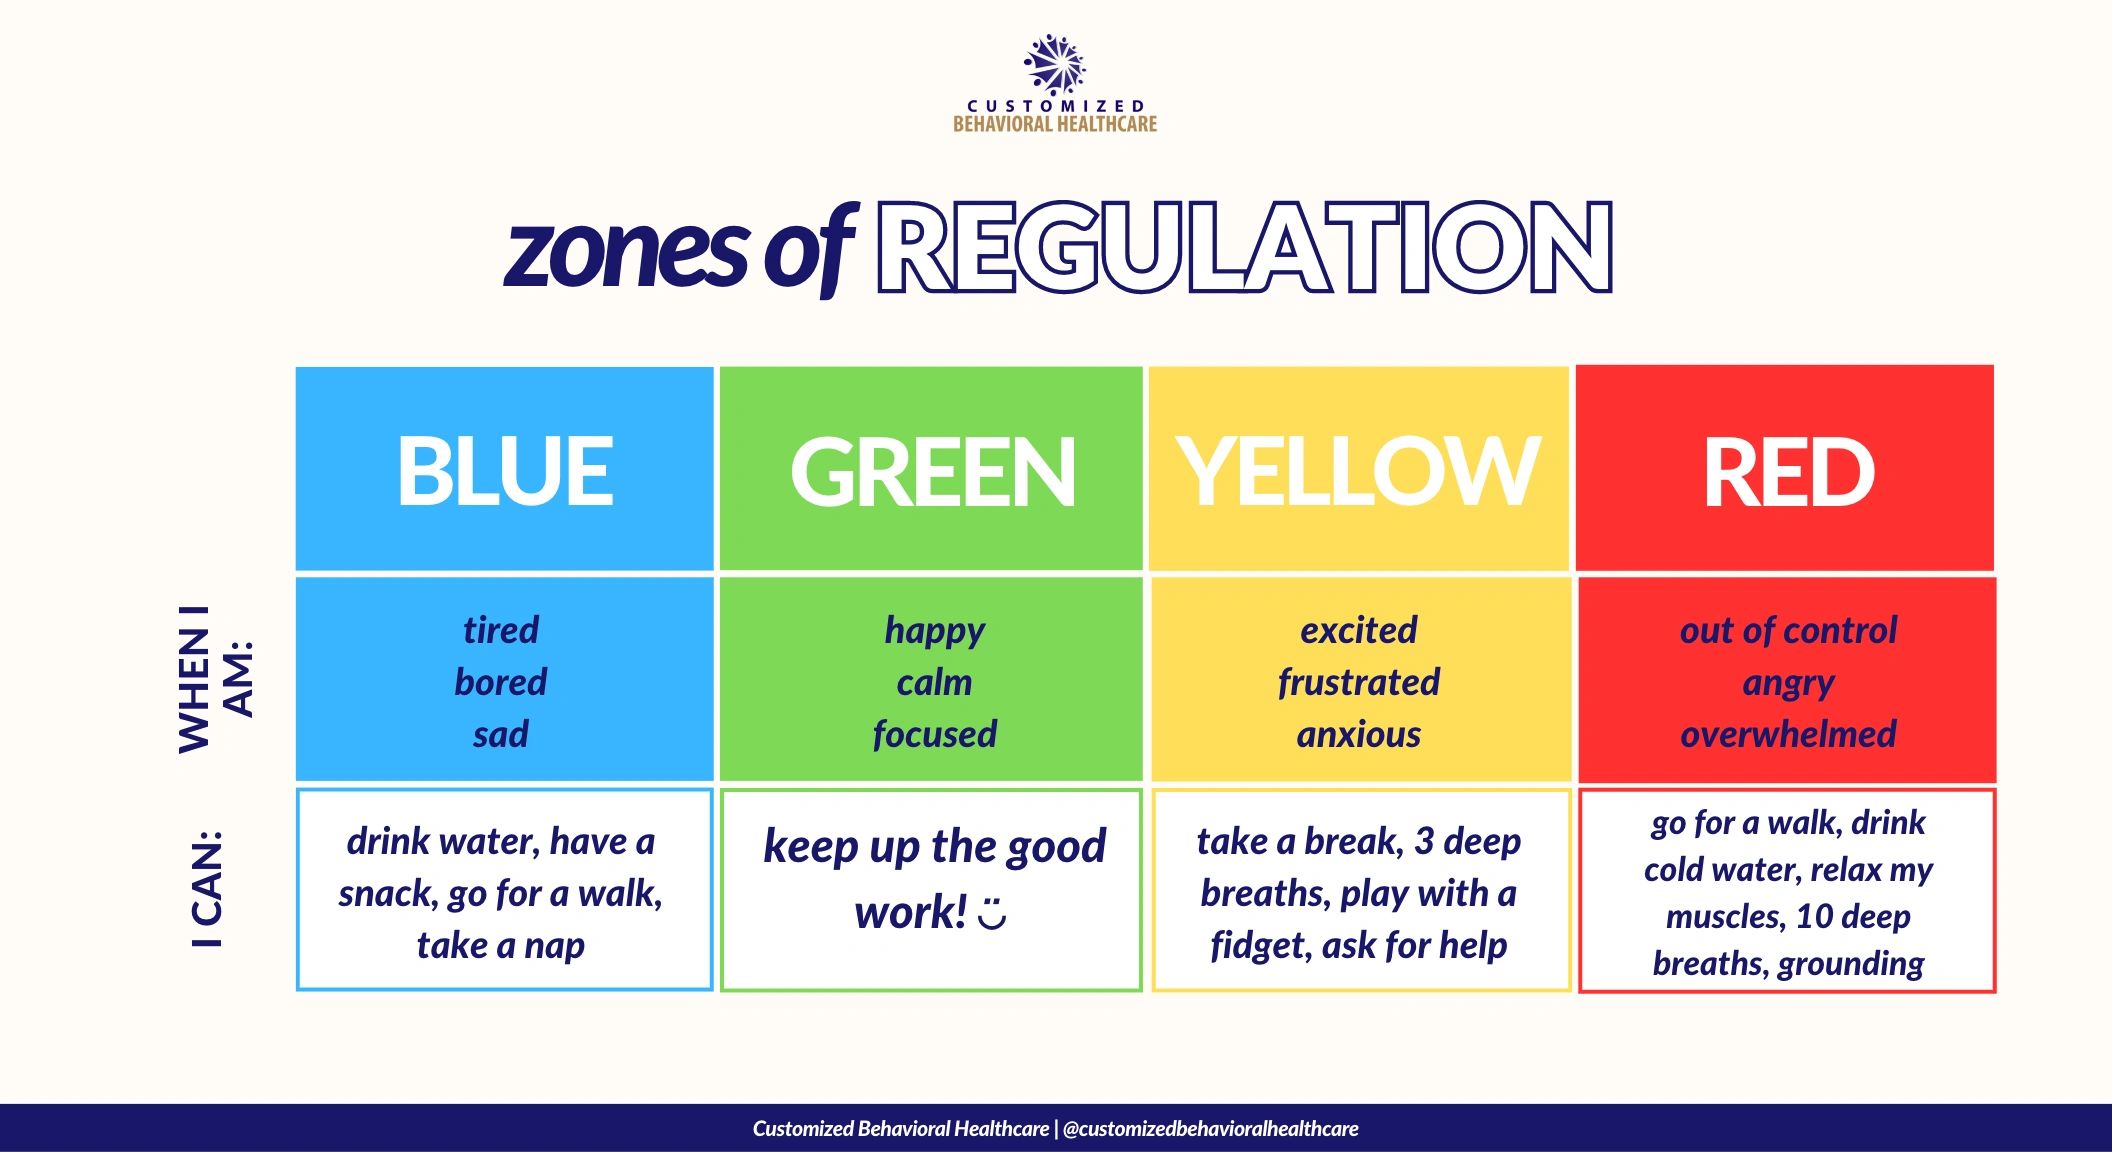 What are the Four Zones of Regulation? - The Zones of Regulation